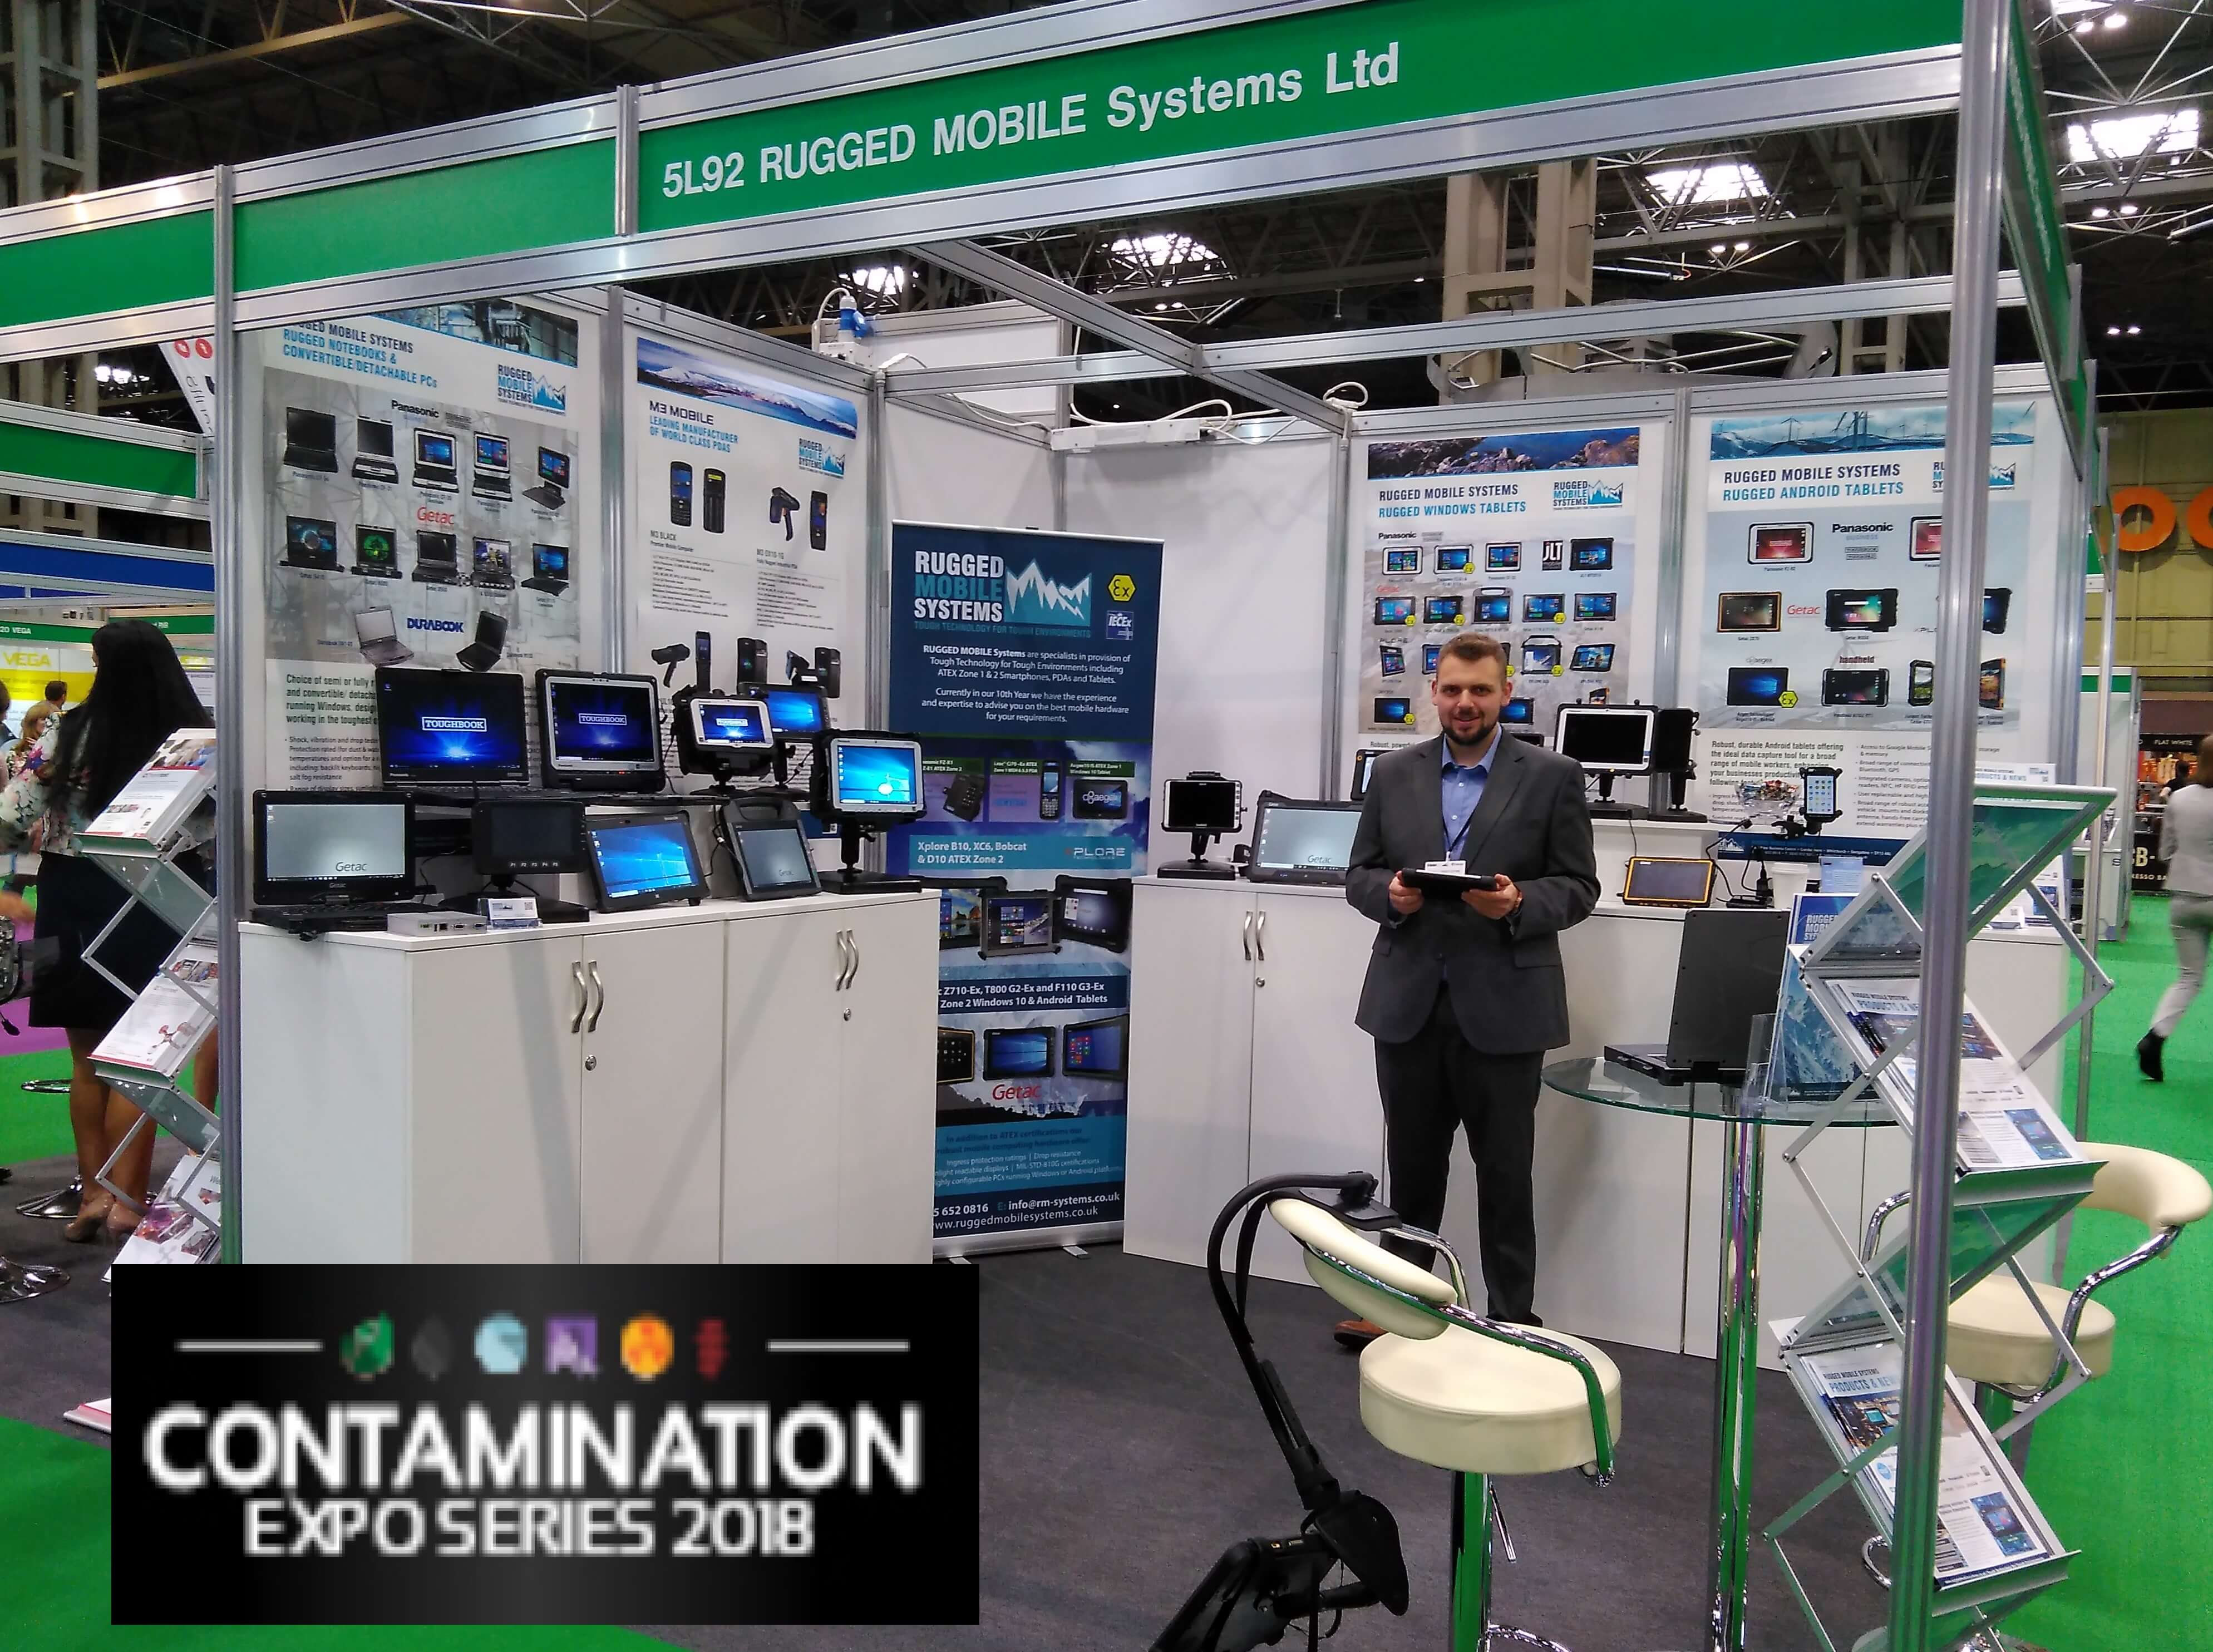 Contamination Expo Series 2018 - A productive 2 days meeting new companies